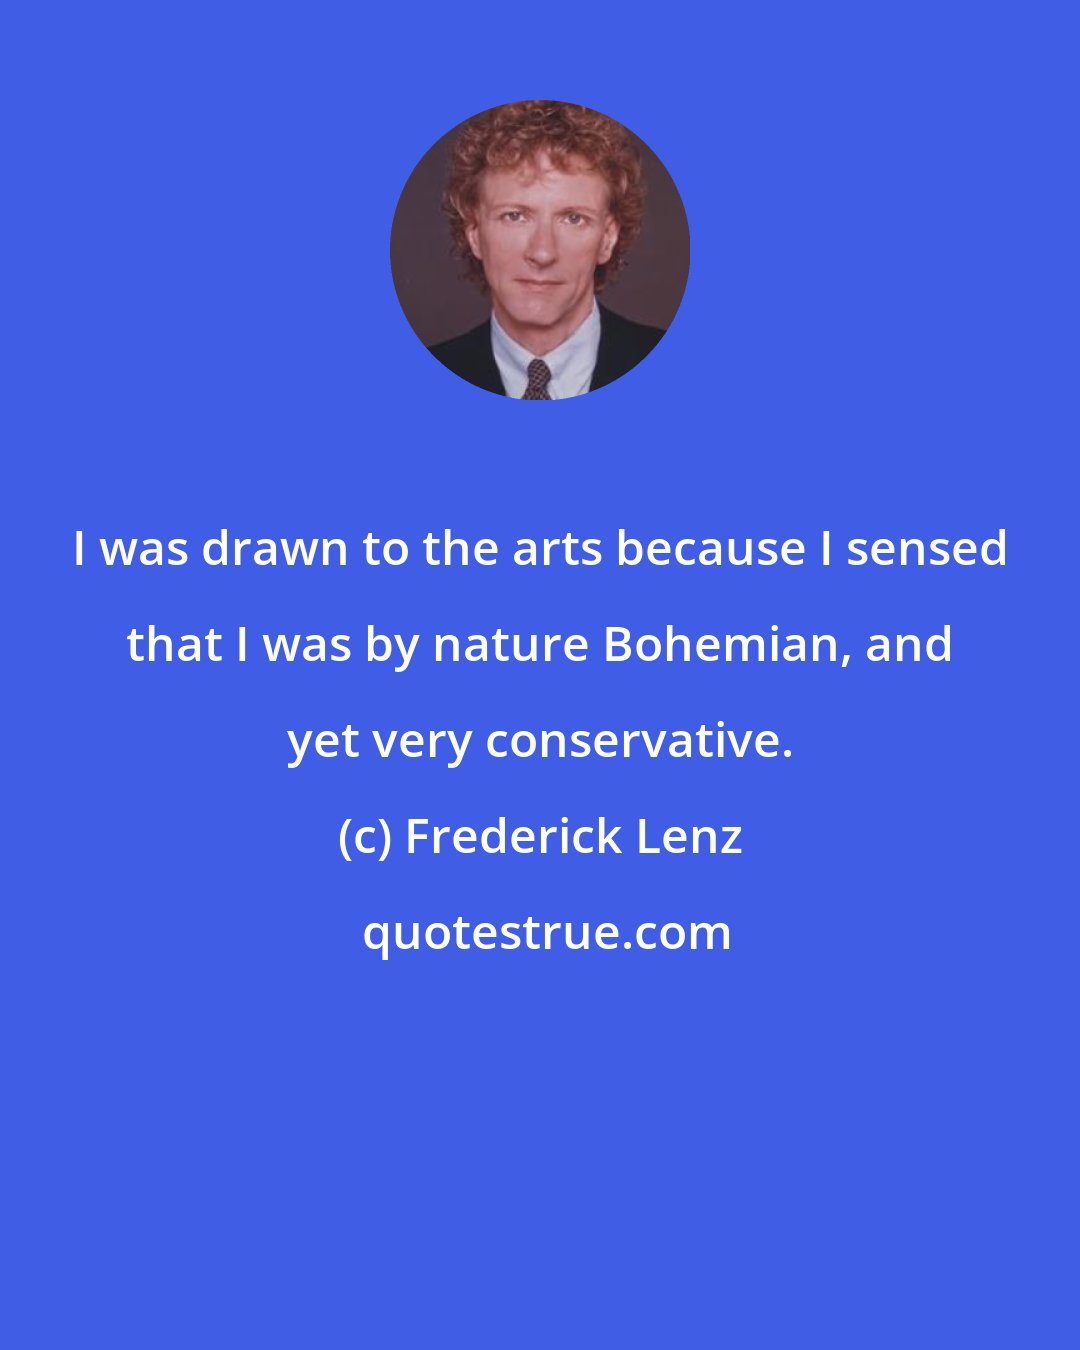 Frederick Lenz: I was drawn to the arts because I sensed that I was by nature Bohemian, and yet very conservative.